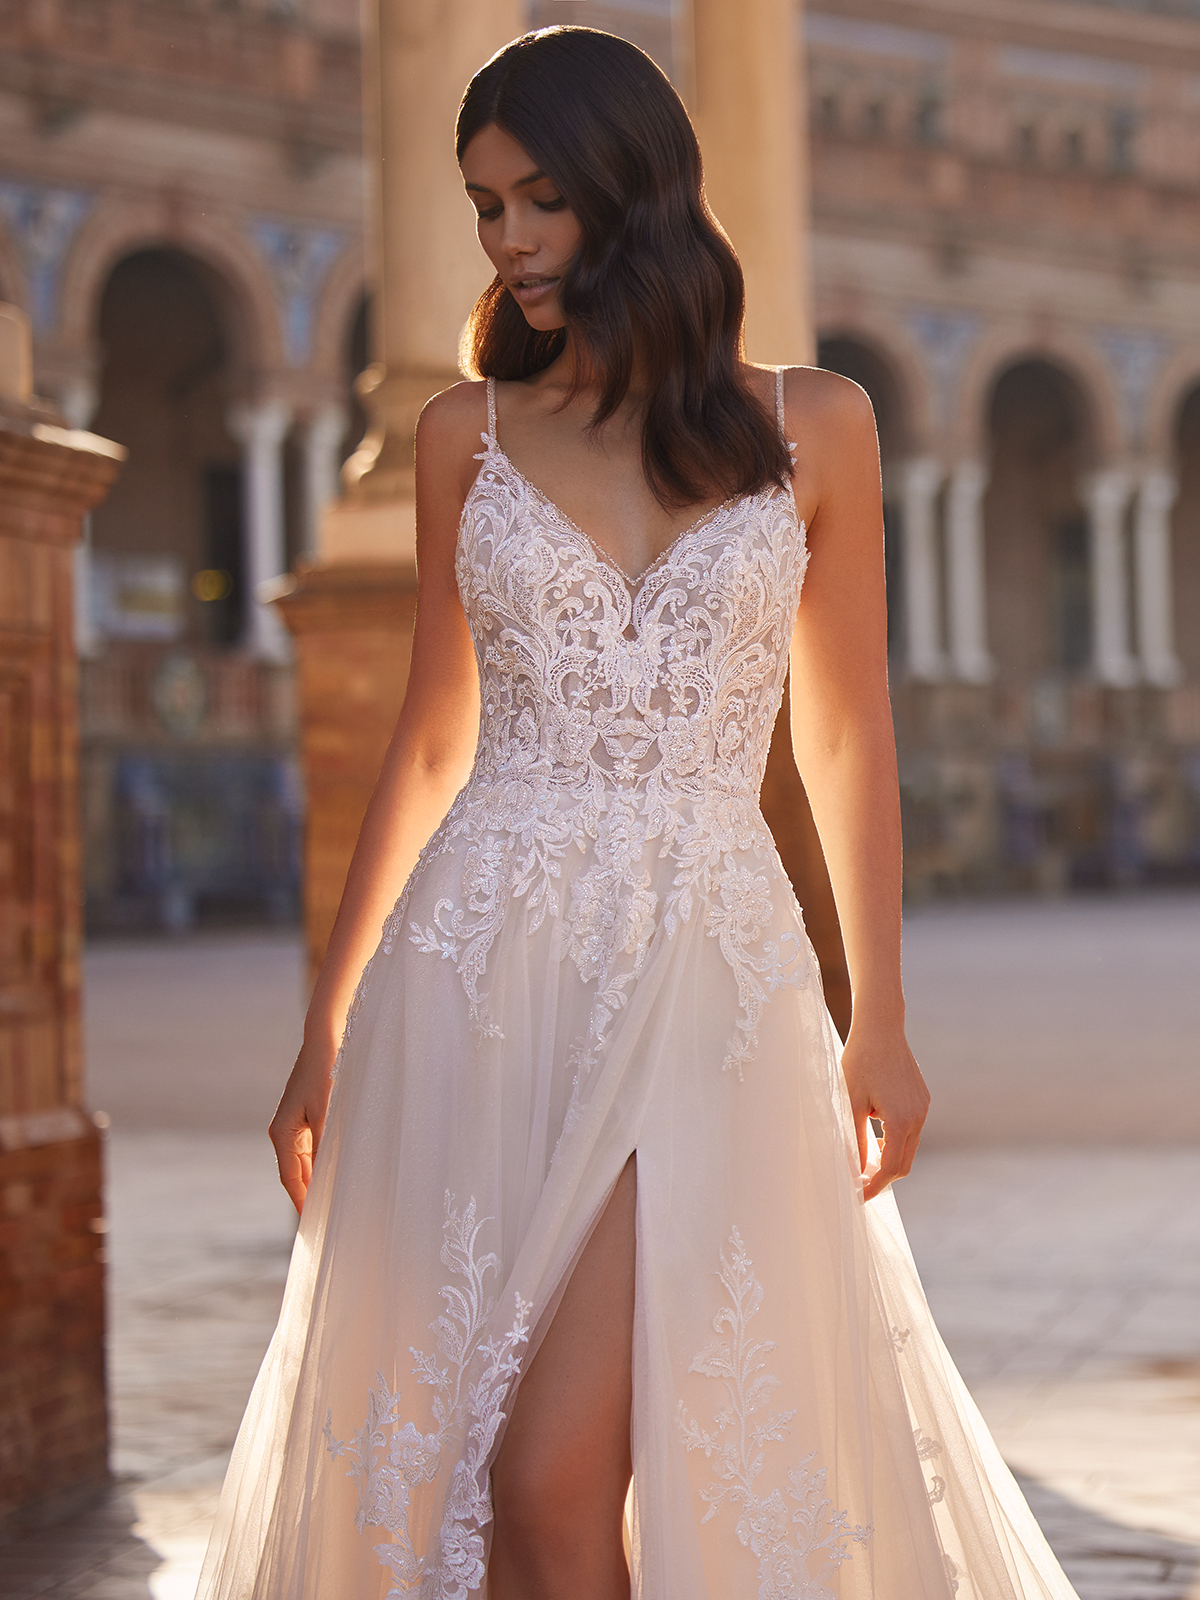 Moonlight Couture Fall 2019 Wedding Dresses